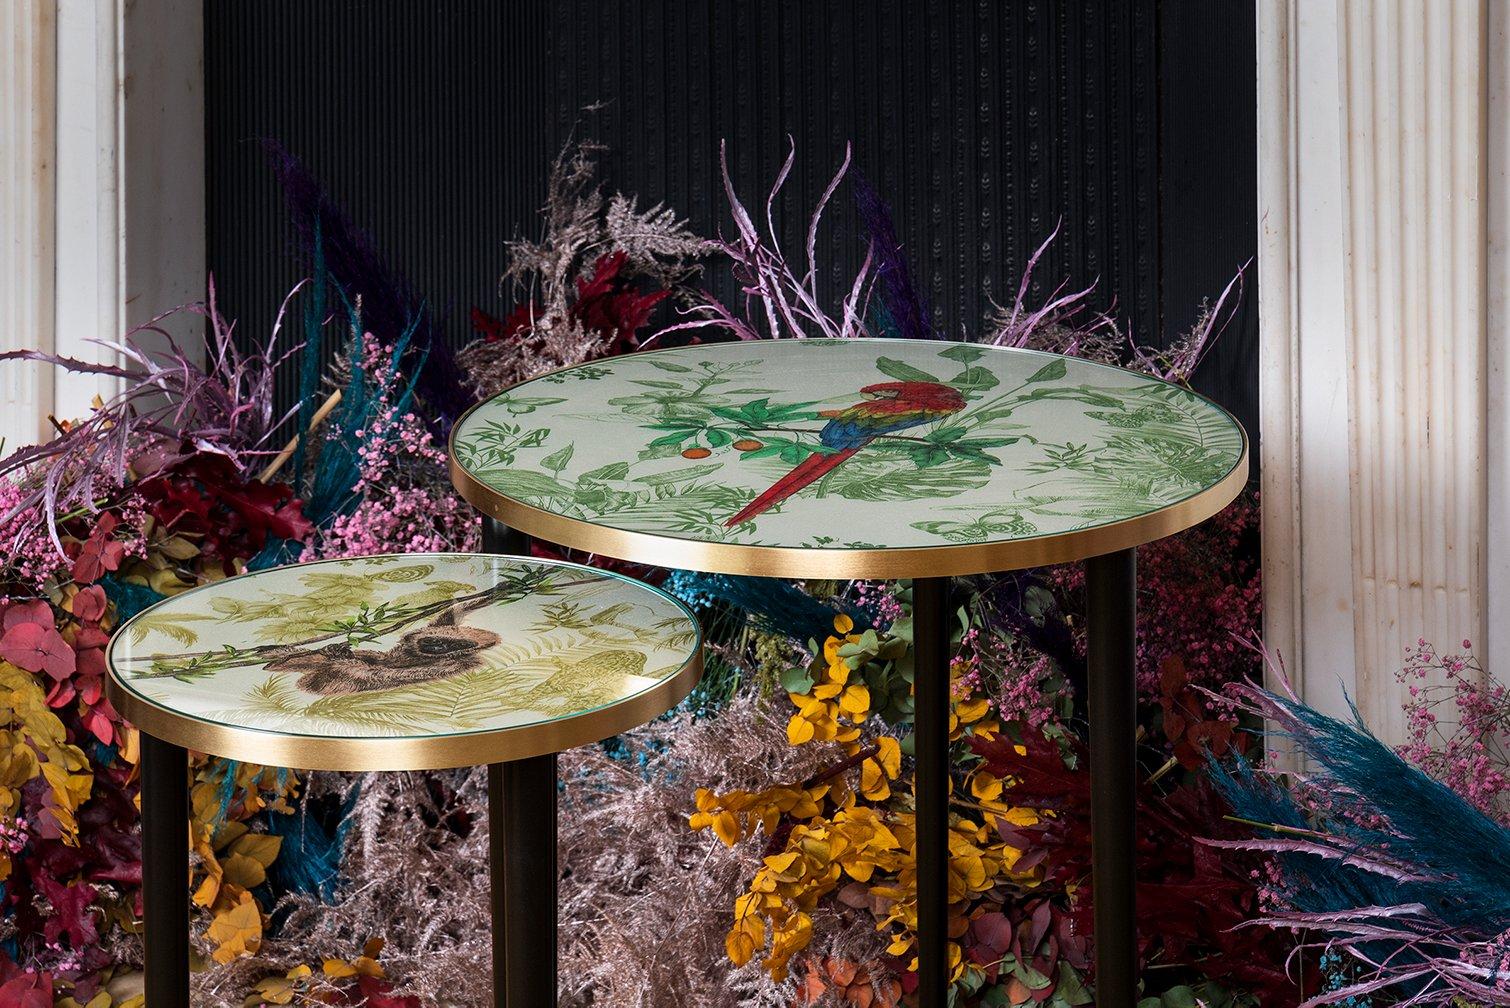 Create your own whimsical menagerie with Matthew Williamson’s collection of beautiful animal menagerie, fine upholstered onto these circular tables which are versatile enough to be used as side tables, cocktail tables, either as a nest or as